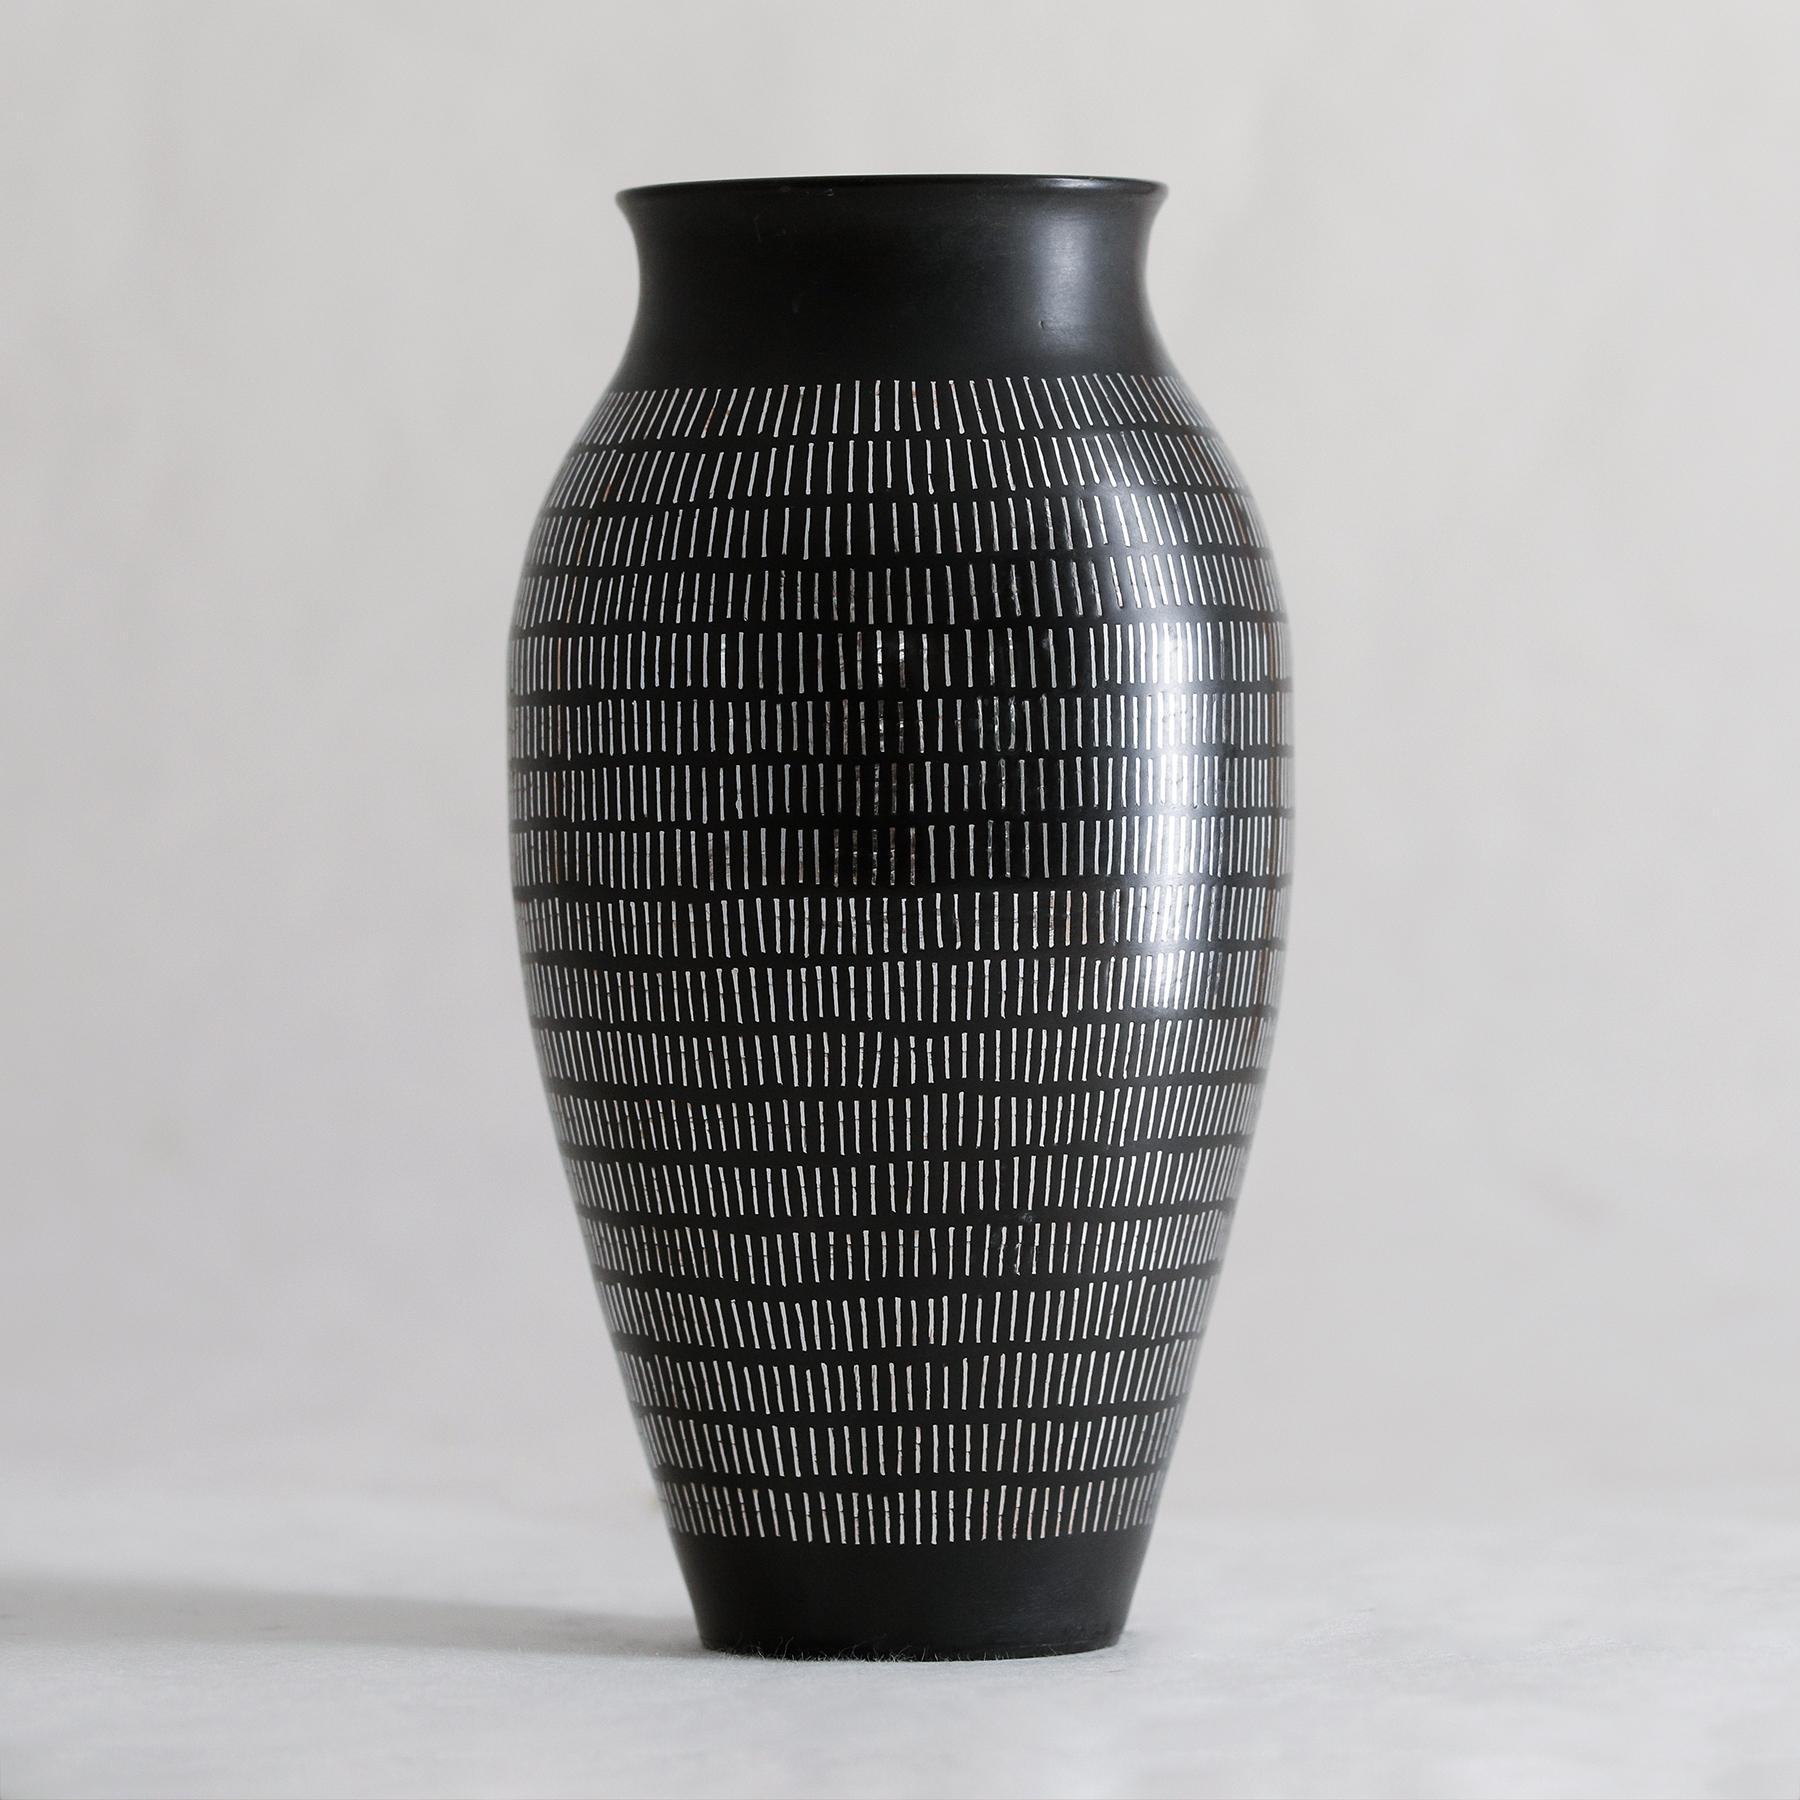 Inspired by moonlight on water, these vases are named after cities beside the Mediterranean Sea. Slender silver elements are fused onto the surface of cast vases to create beautifully flashes of light in the black metal.